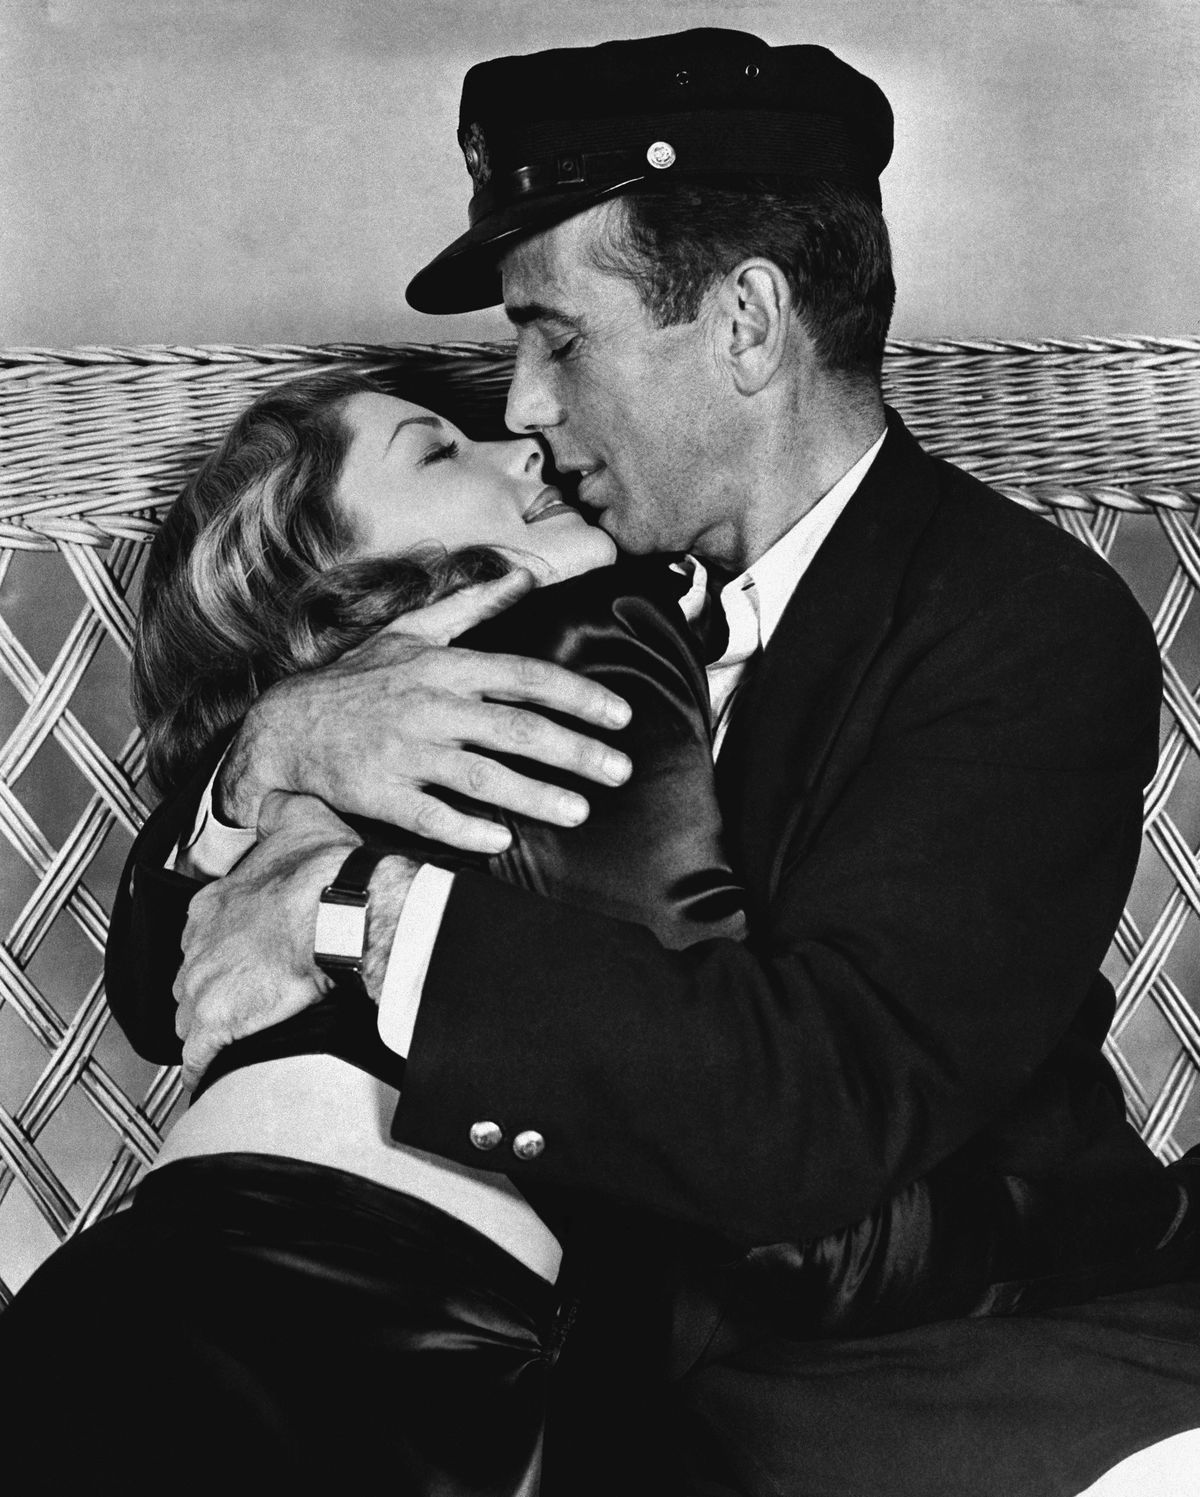 FILE - This 1944 file photo originally released by Warner Bros. shows actor Humphrey Bogart, right, holding actress Lauren Bacall in a scene from, "To Have and Have Not." Bacall, the sultry-voiced actress and Humphrey Bogart;s partner off and on the screen, died Tuesday, Aug. 12, 2014 in New York. She was 89. (Warner Bros.)